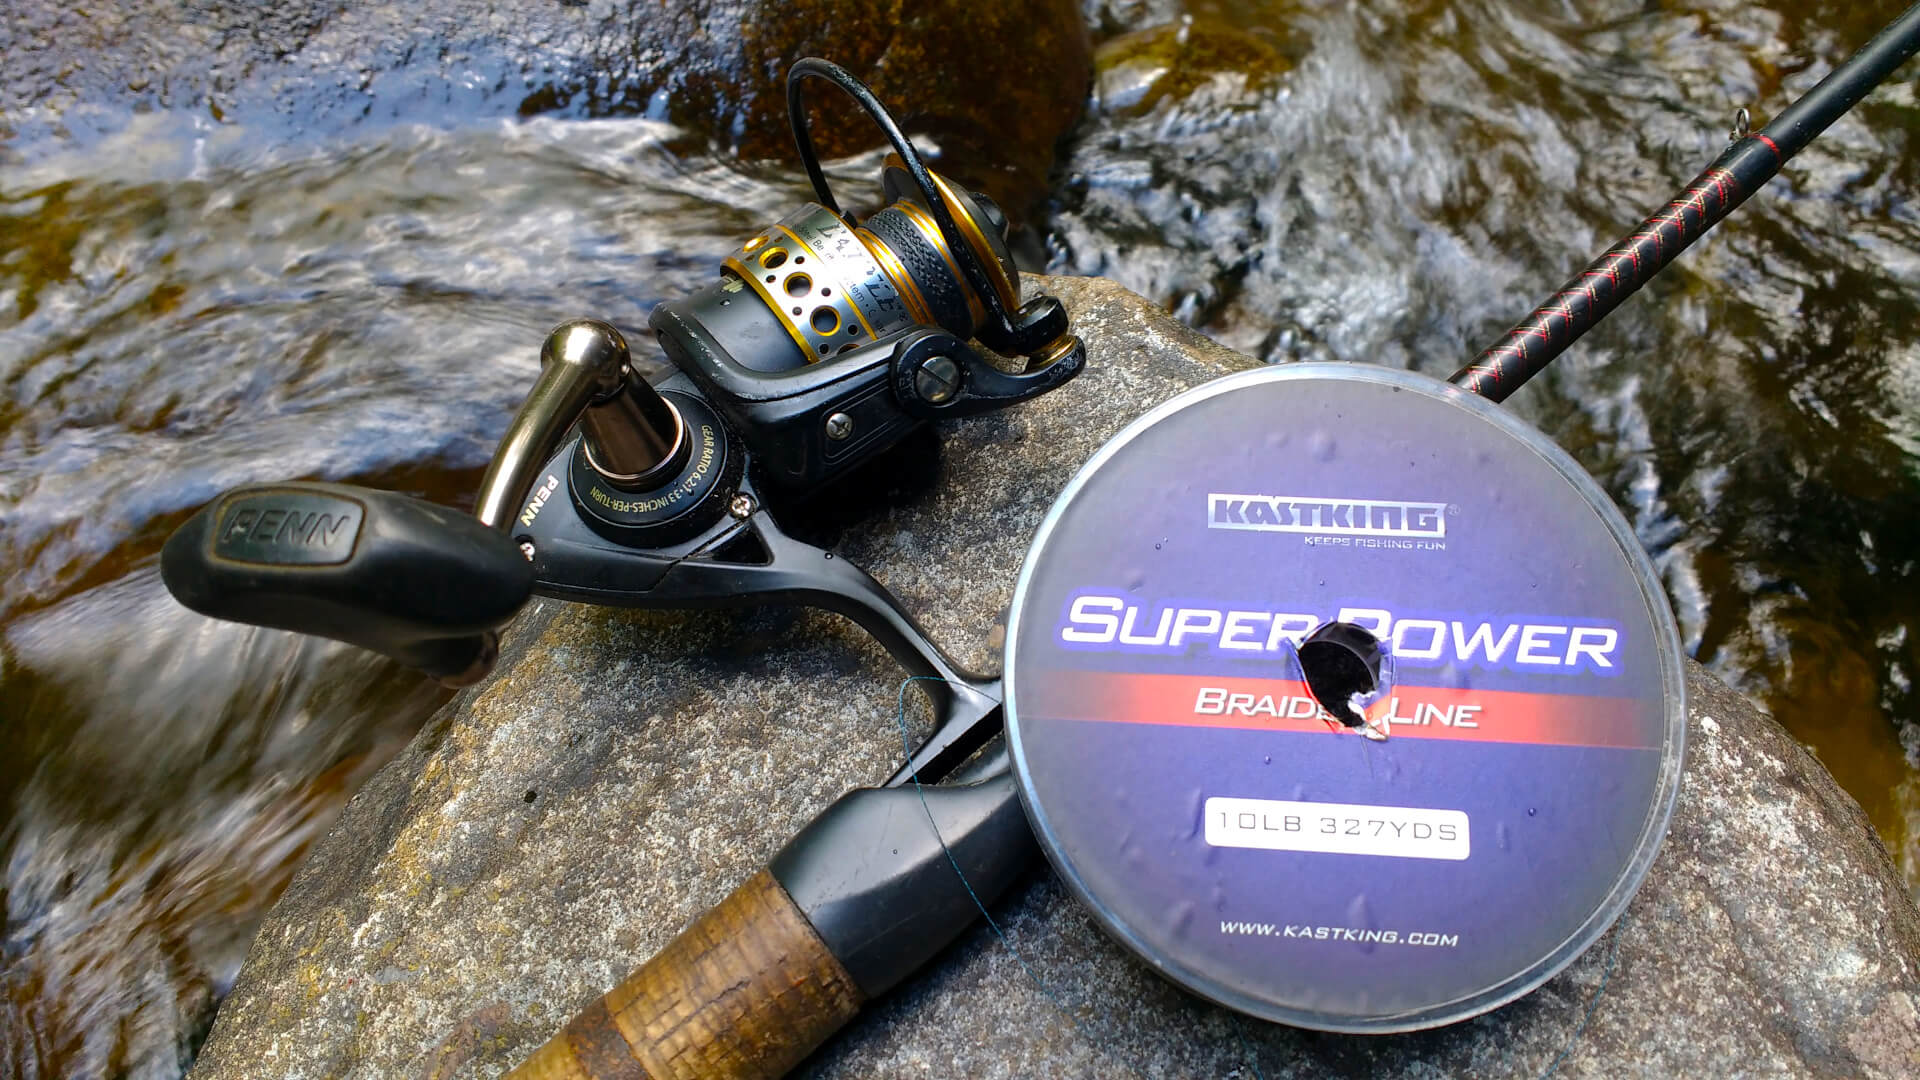 Spool Up: How to Put Line on a Fishing Reel With an Arbor Knot